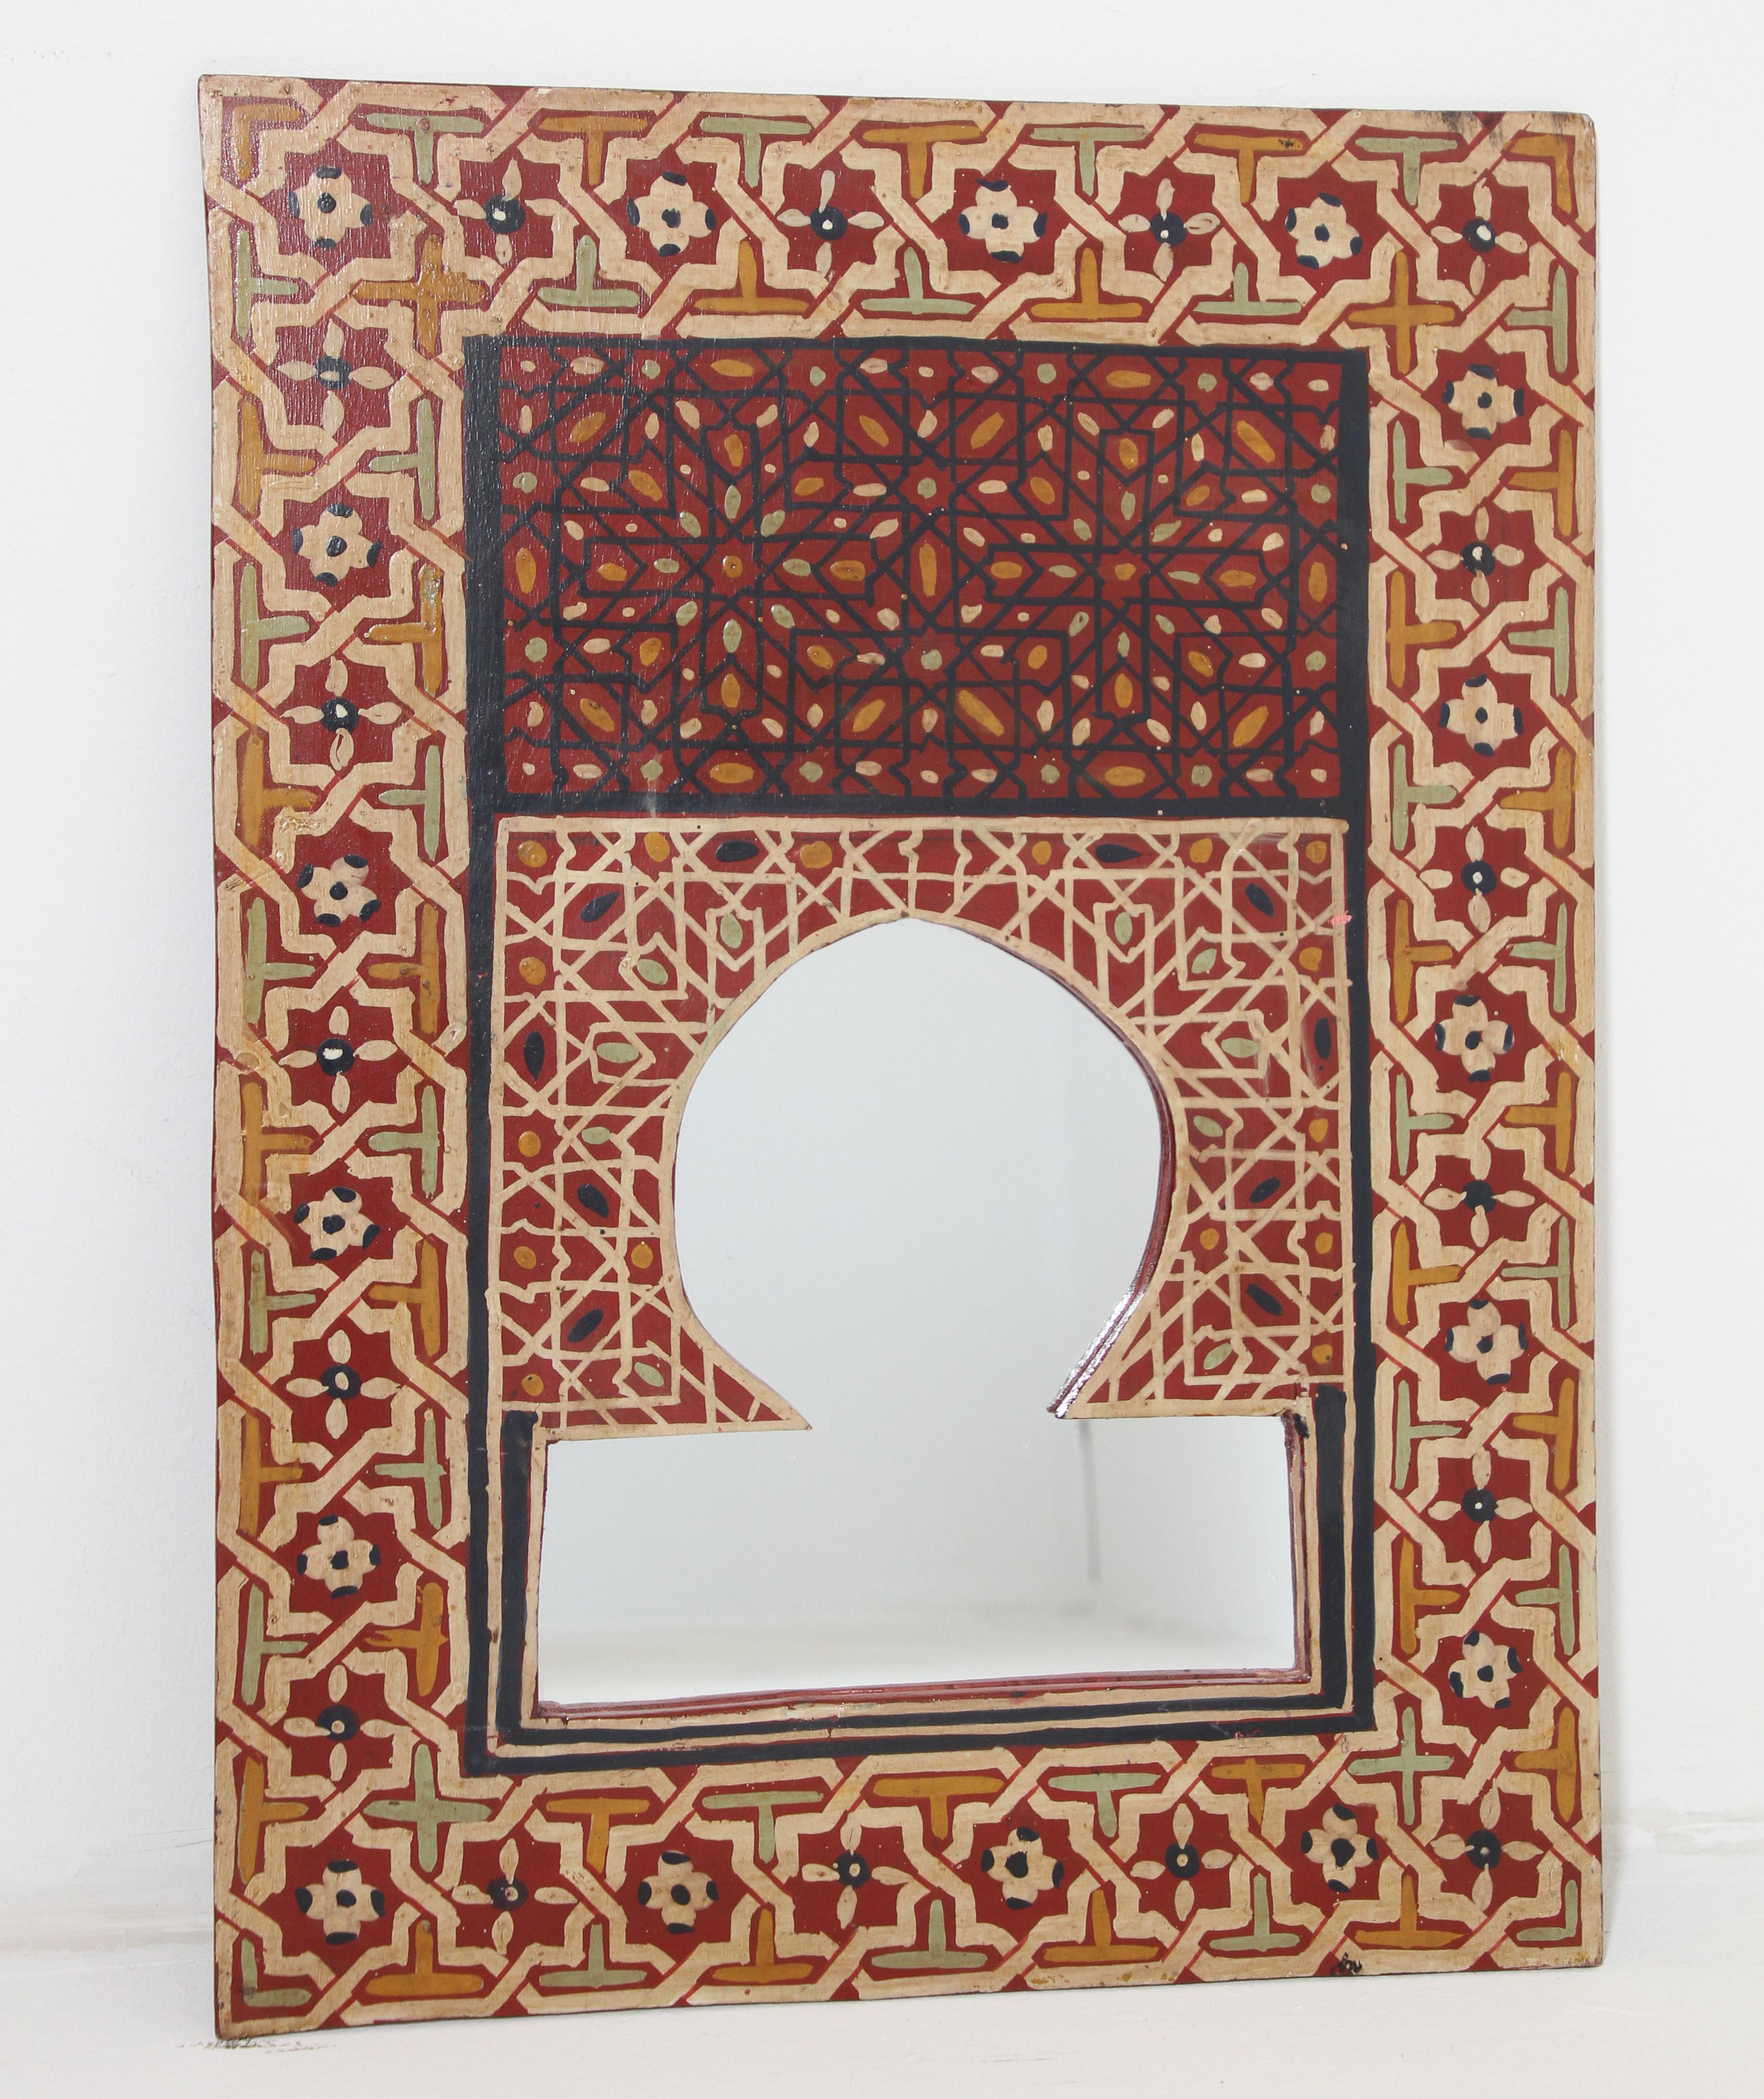 Vintage Moroccan mirror, hand painted, wooden Moorish window shaped mirror.
Beautiful hand crafted mirror in a traditional hand painted Moorish detailed design with elaborate arabesque and geometric design.
This mirror will be a perfect addiction